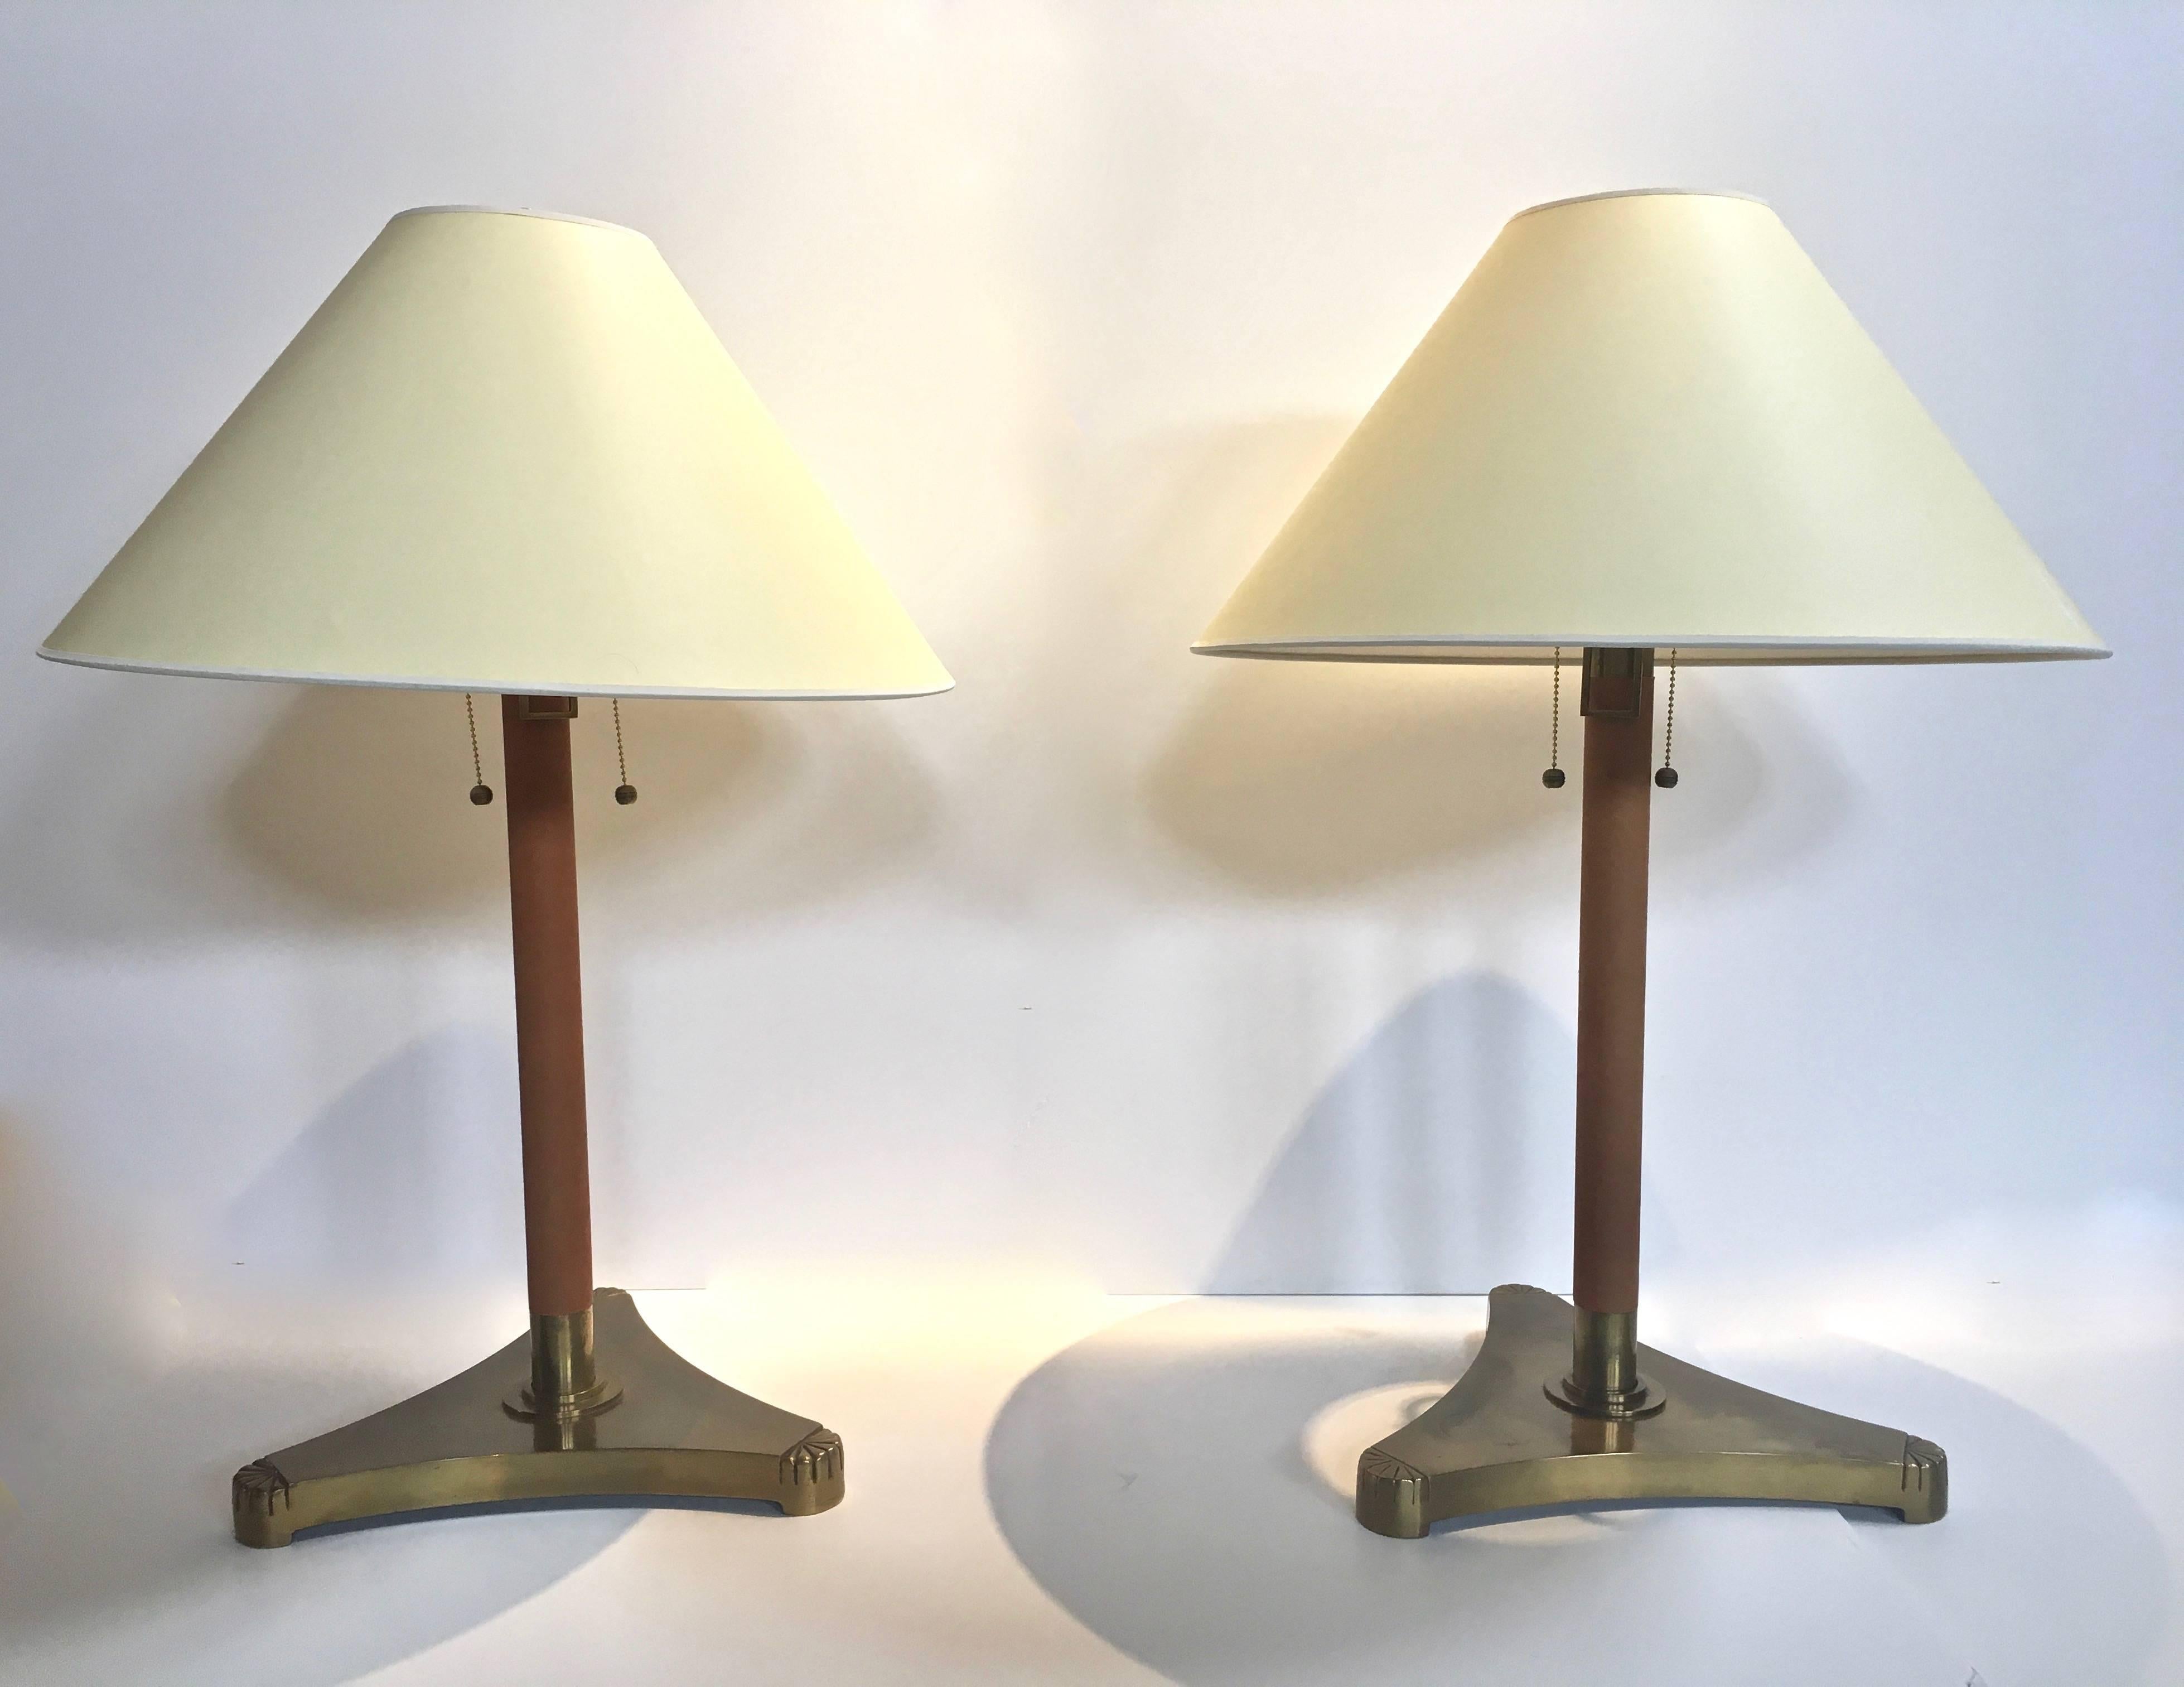 Unusual pair of extendable brass table lamps, clad in saddle stitched tanned leather, in the manner of Hermes or Adnet. Brass ring near neck of lamp, flips up releasing the brass neck of to lamp, to extend up or down 5 inches, thus creating a